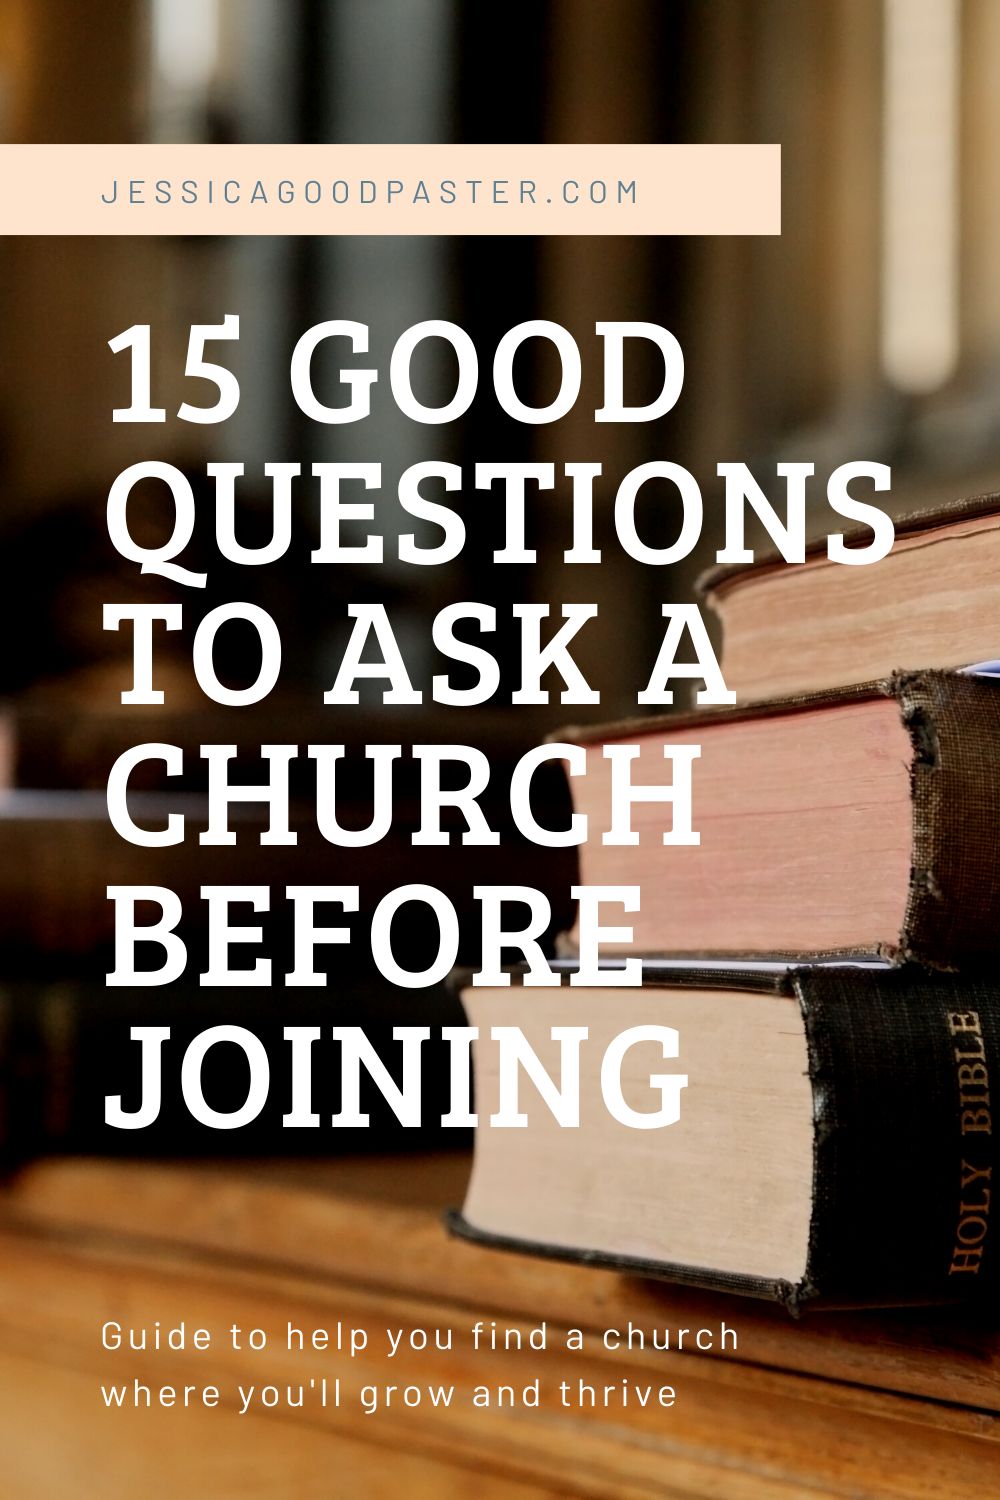 Finding the right church is important to grow and thrive in your faith. Use this list of questions for potential churches, pastors, and leadership as a guide when looking for a new place to worship. These are also great to ask your existing church before joining or to deal with disagreements with preaching. #churchquestions #church #newchurch #christian #faith #findachurch #pastors